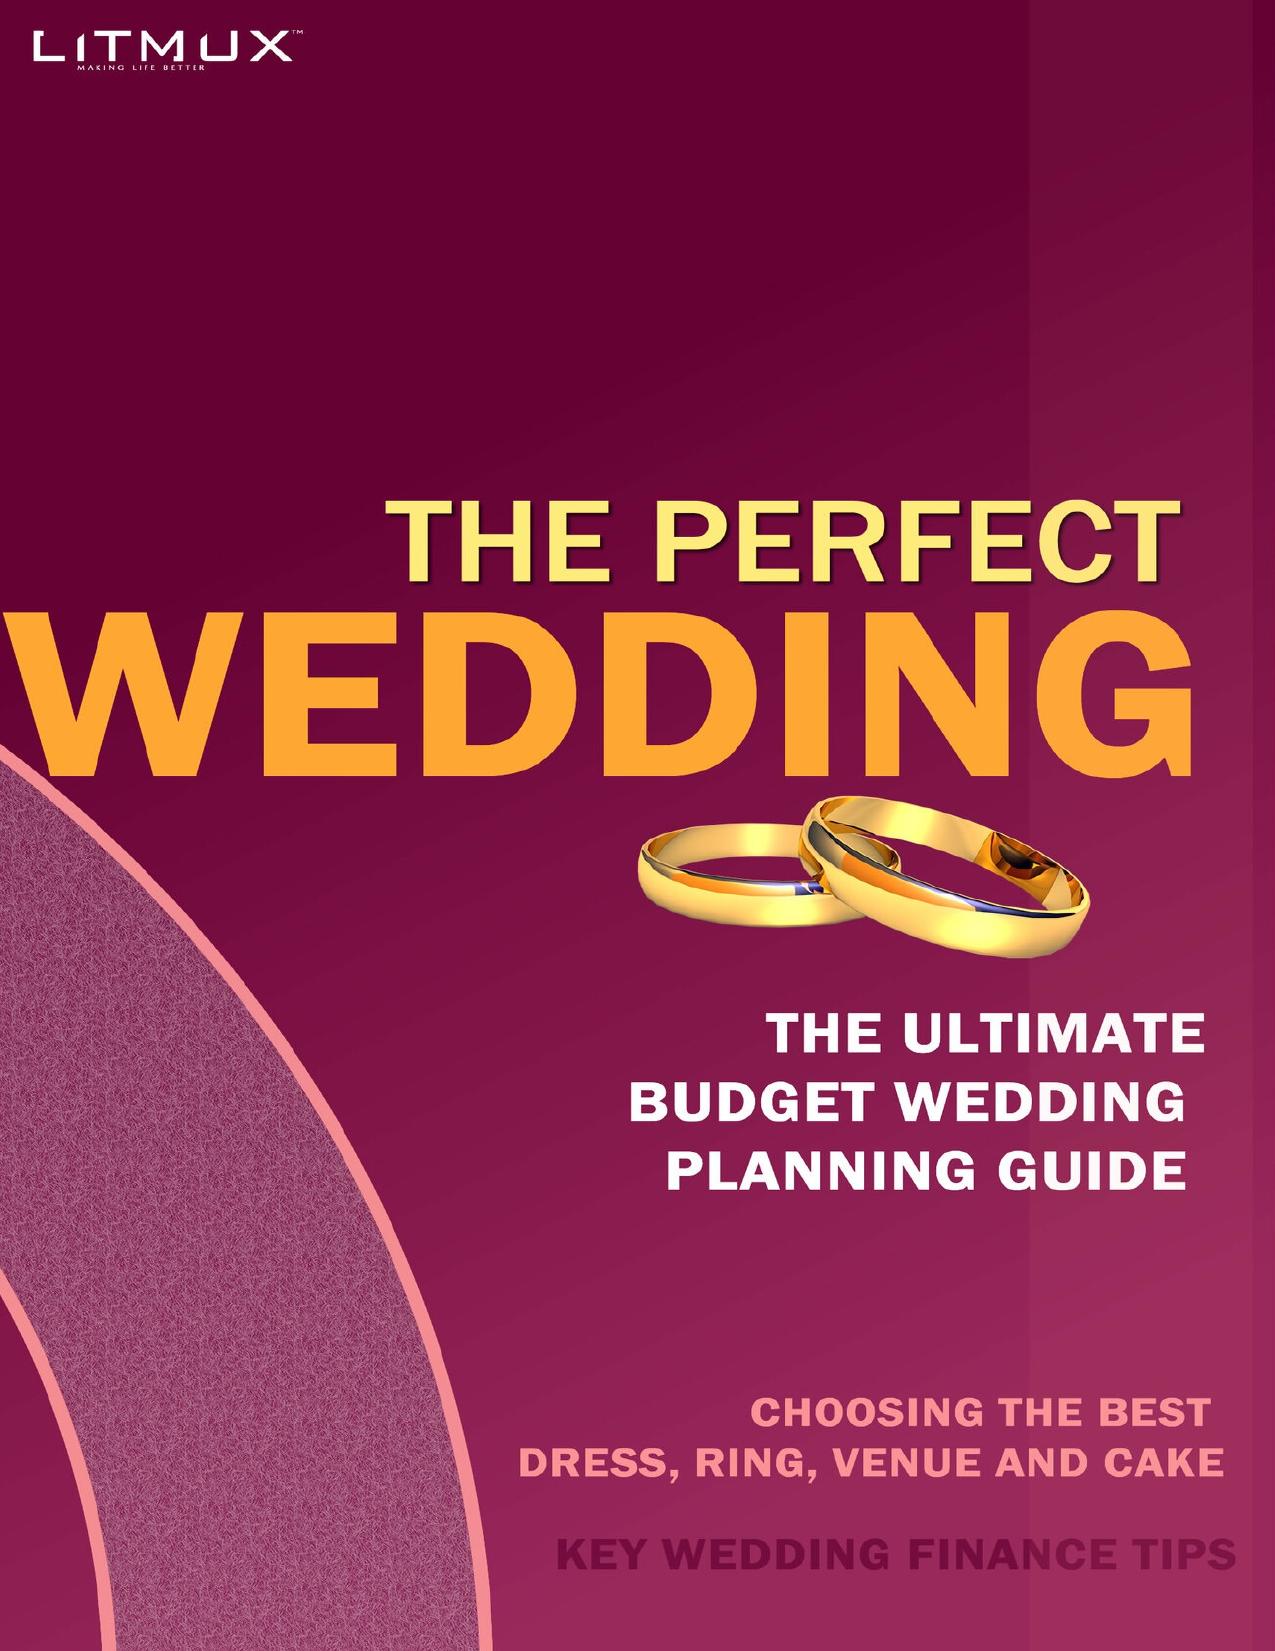 The Perfect Wedding: The Ultimate Budget Wedding Planning Guide, Key Wedding Finance Tips, Choosing The Best Dress, Ring, Venue And Cake by Jubi Gloria & Odame Paul